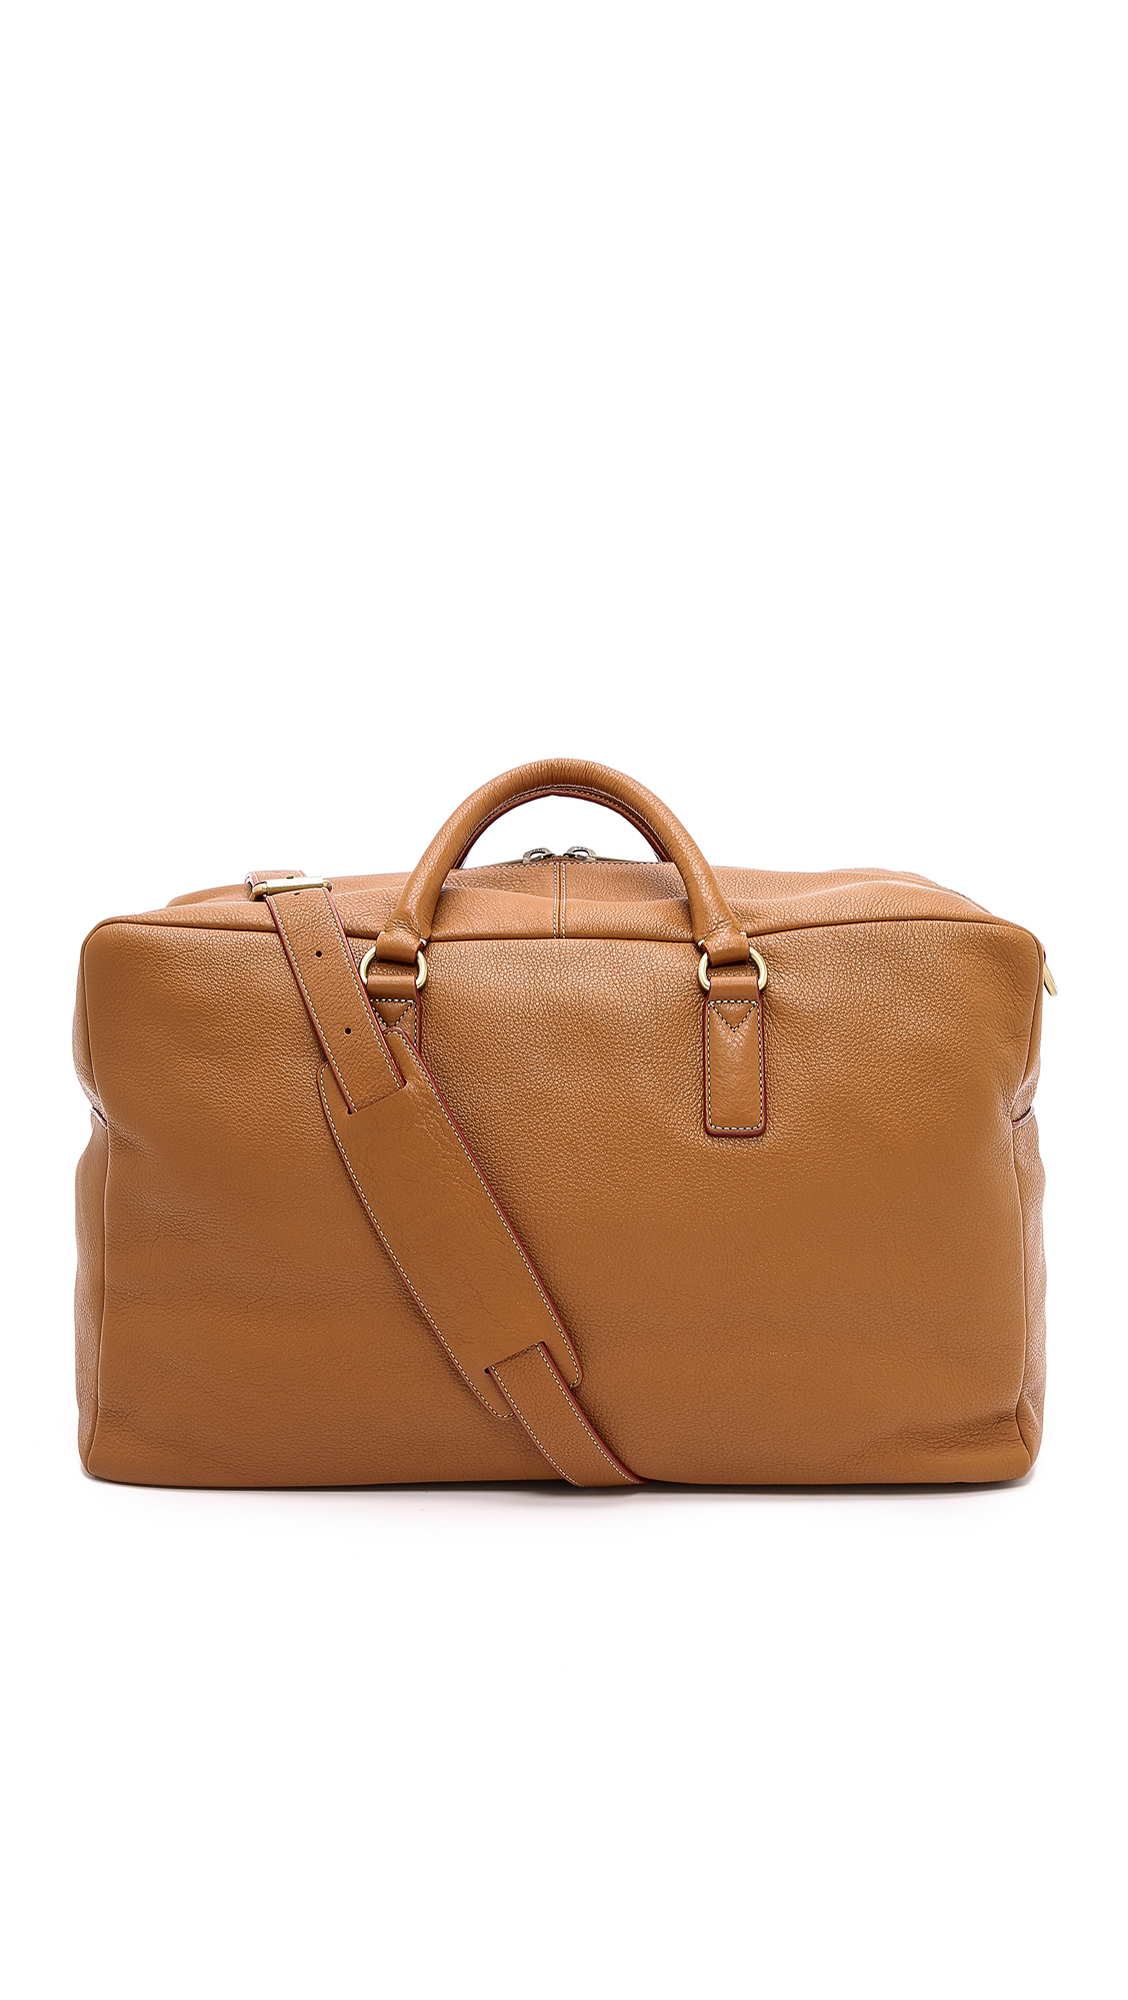 Marc by marc jacobs Classic Leather Weekender in Brown for Men ...  